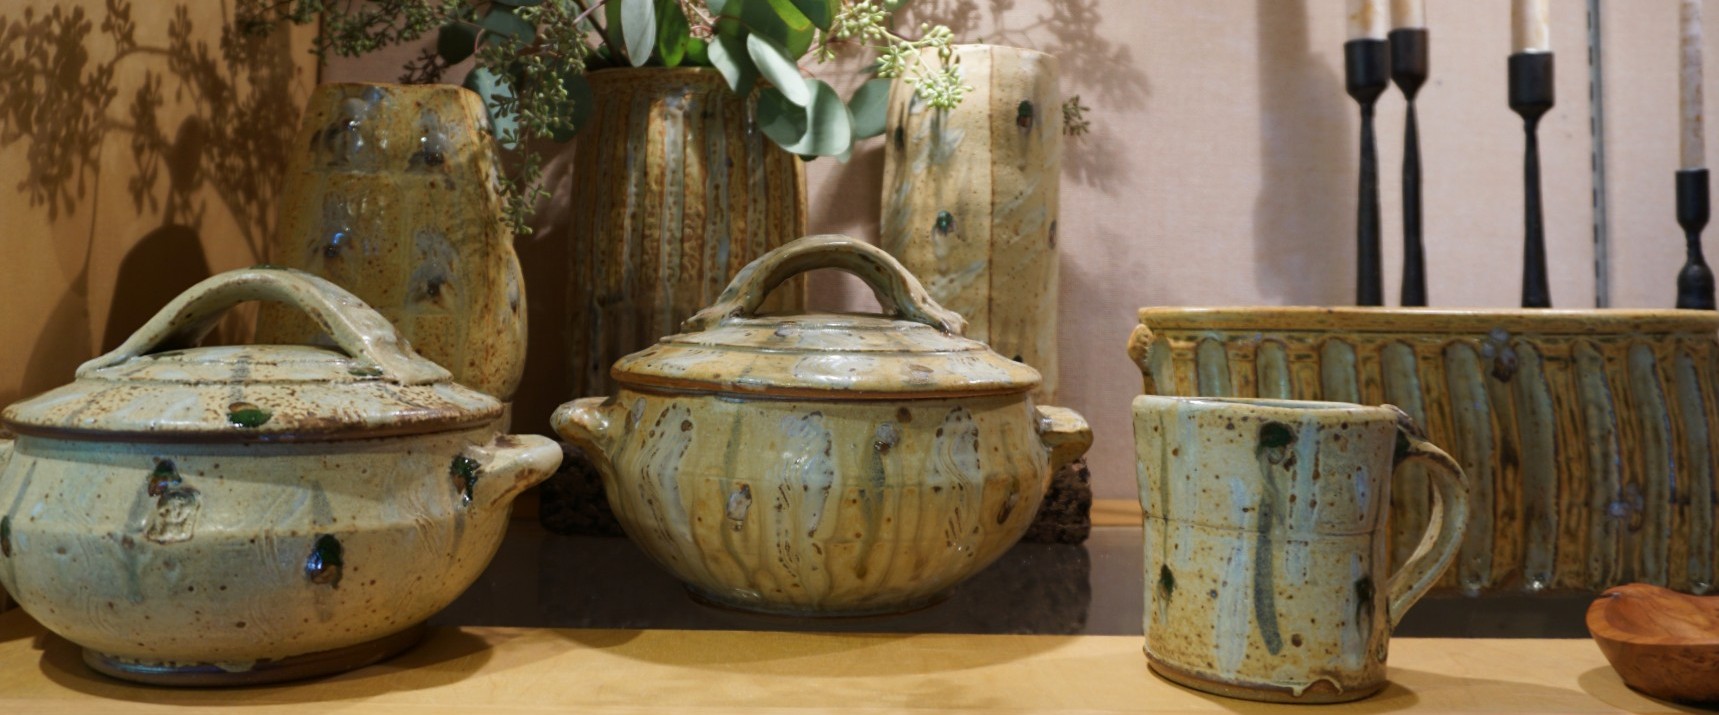 3_Landing_Page_Pottery_952